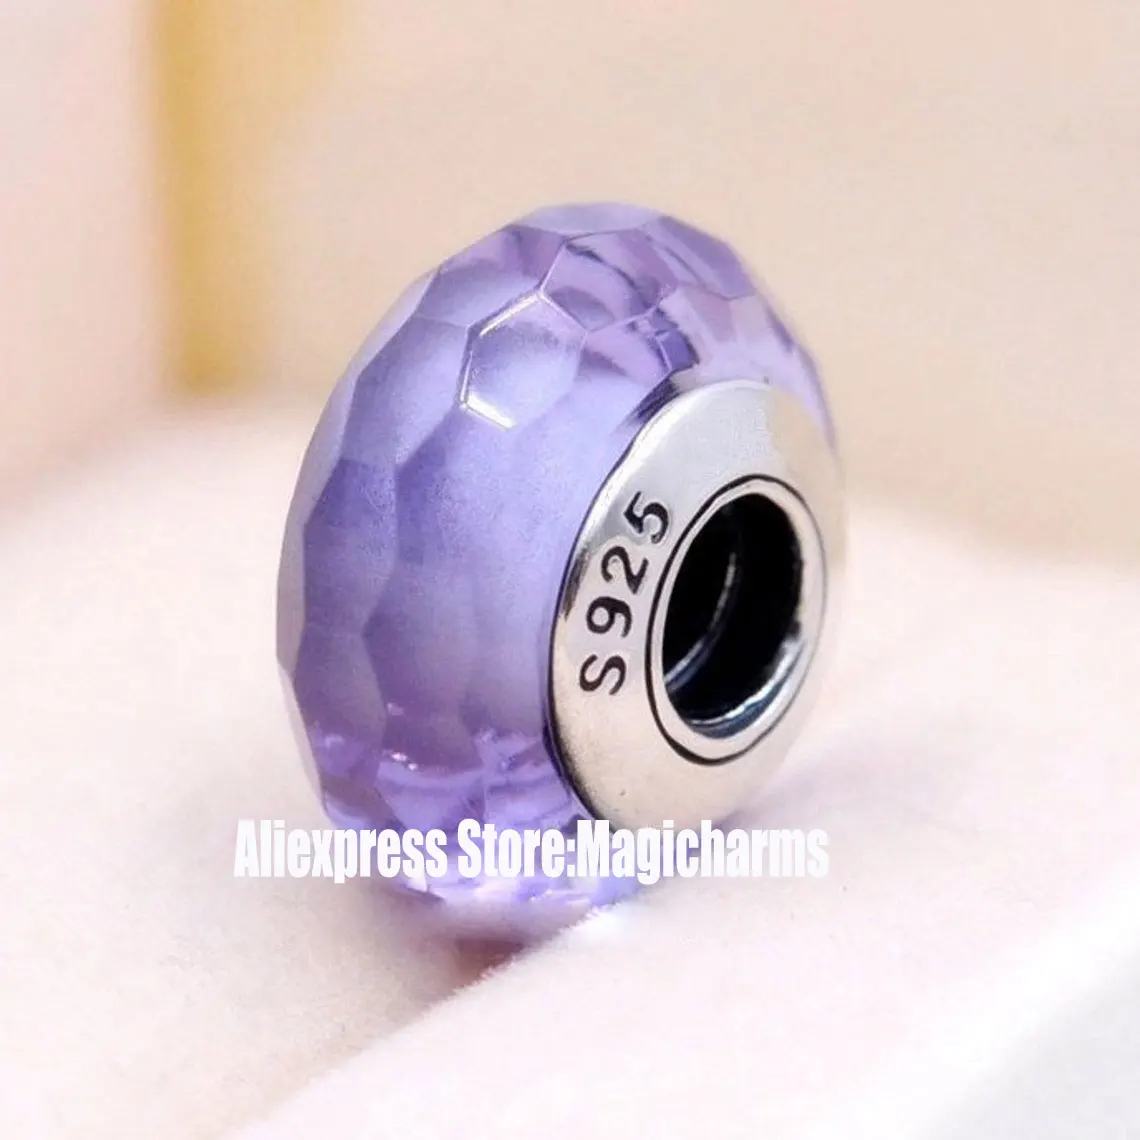 

925 Sterling Silver Violet Fascinating Faceted Murano Glass Charm Bead For Pandora European Jewelry Bracelet